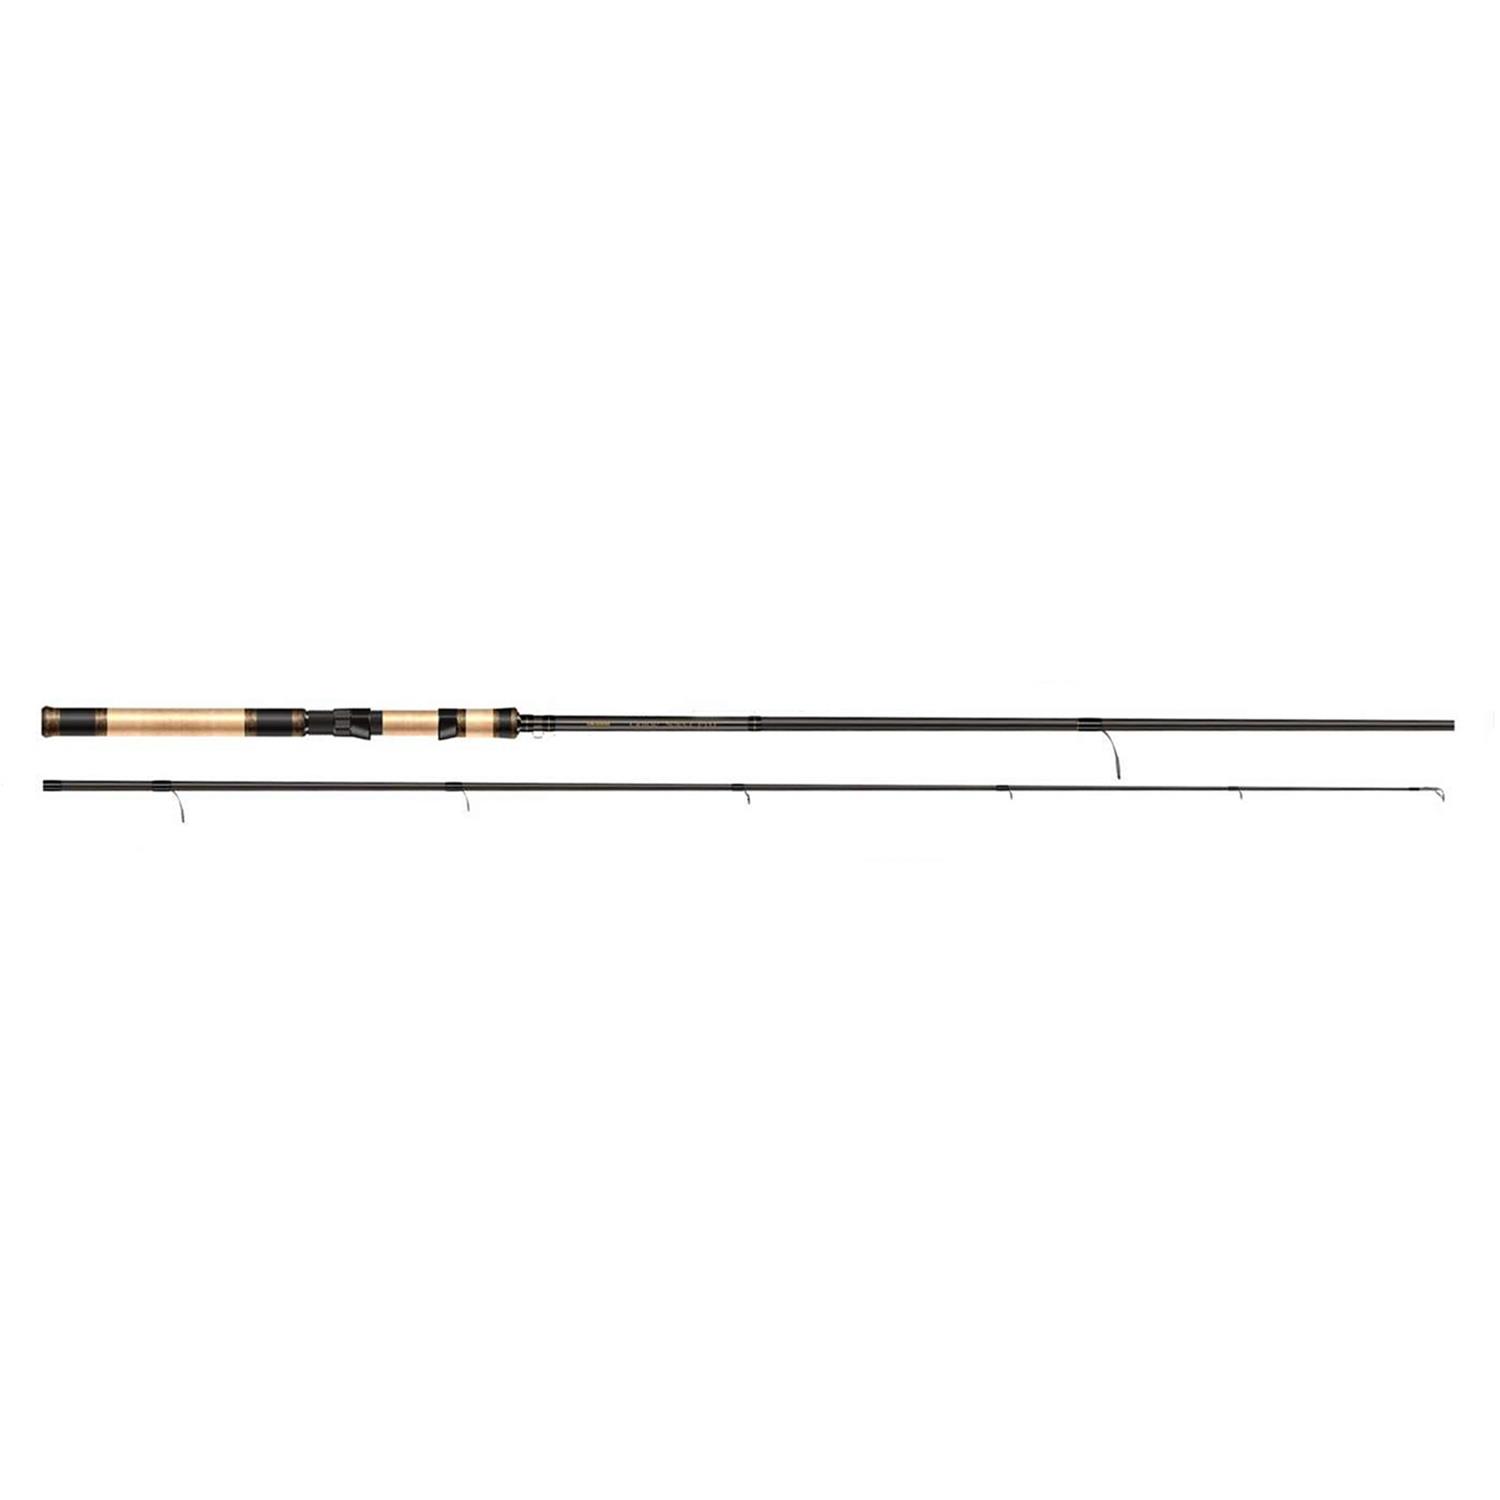 Okuma GSP-S-761L Guide Select Pro Trout Spinning Rod, 7'6 Length, 1 Piece,  2-6 lb Line Rate, 1/8-1/2 Ooz Lure Rate, Light Power